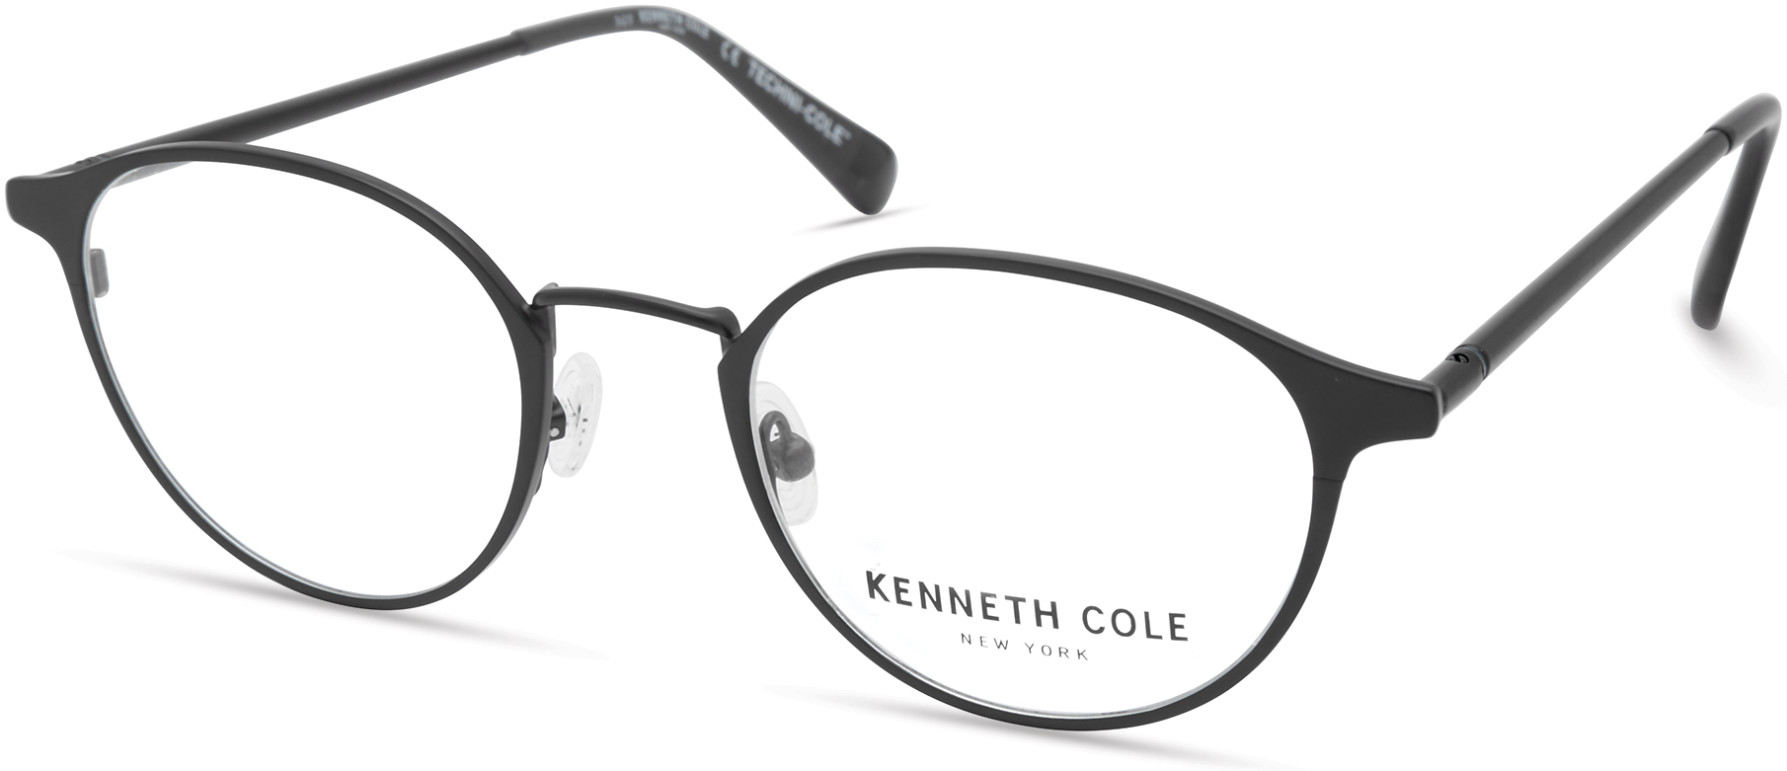 KENNETH COLE NY 0324